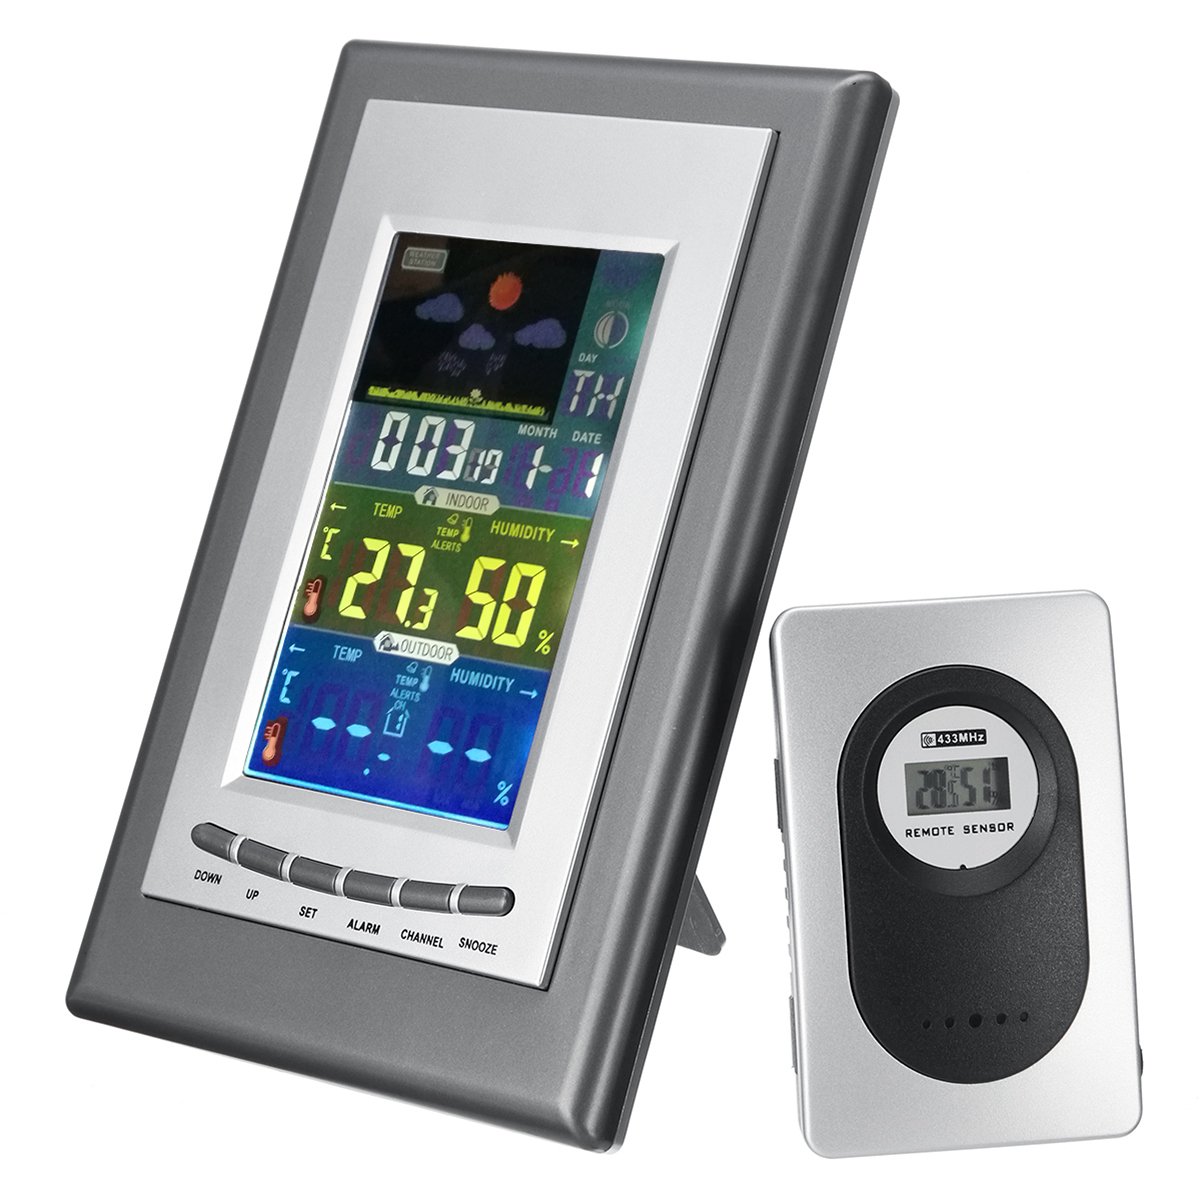 

LCD Weather Station Temperature Sensor Clock Electronic Thermometer Humidity with Remote Sensor